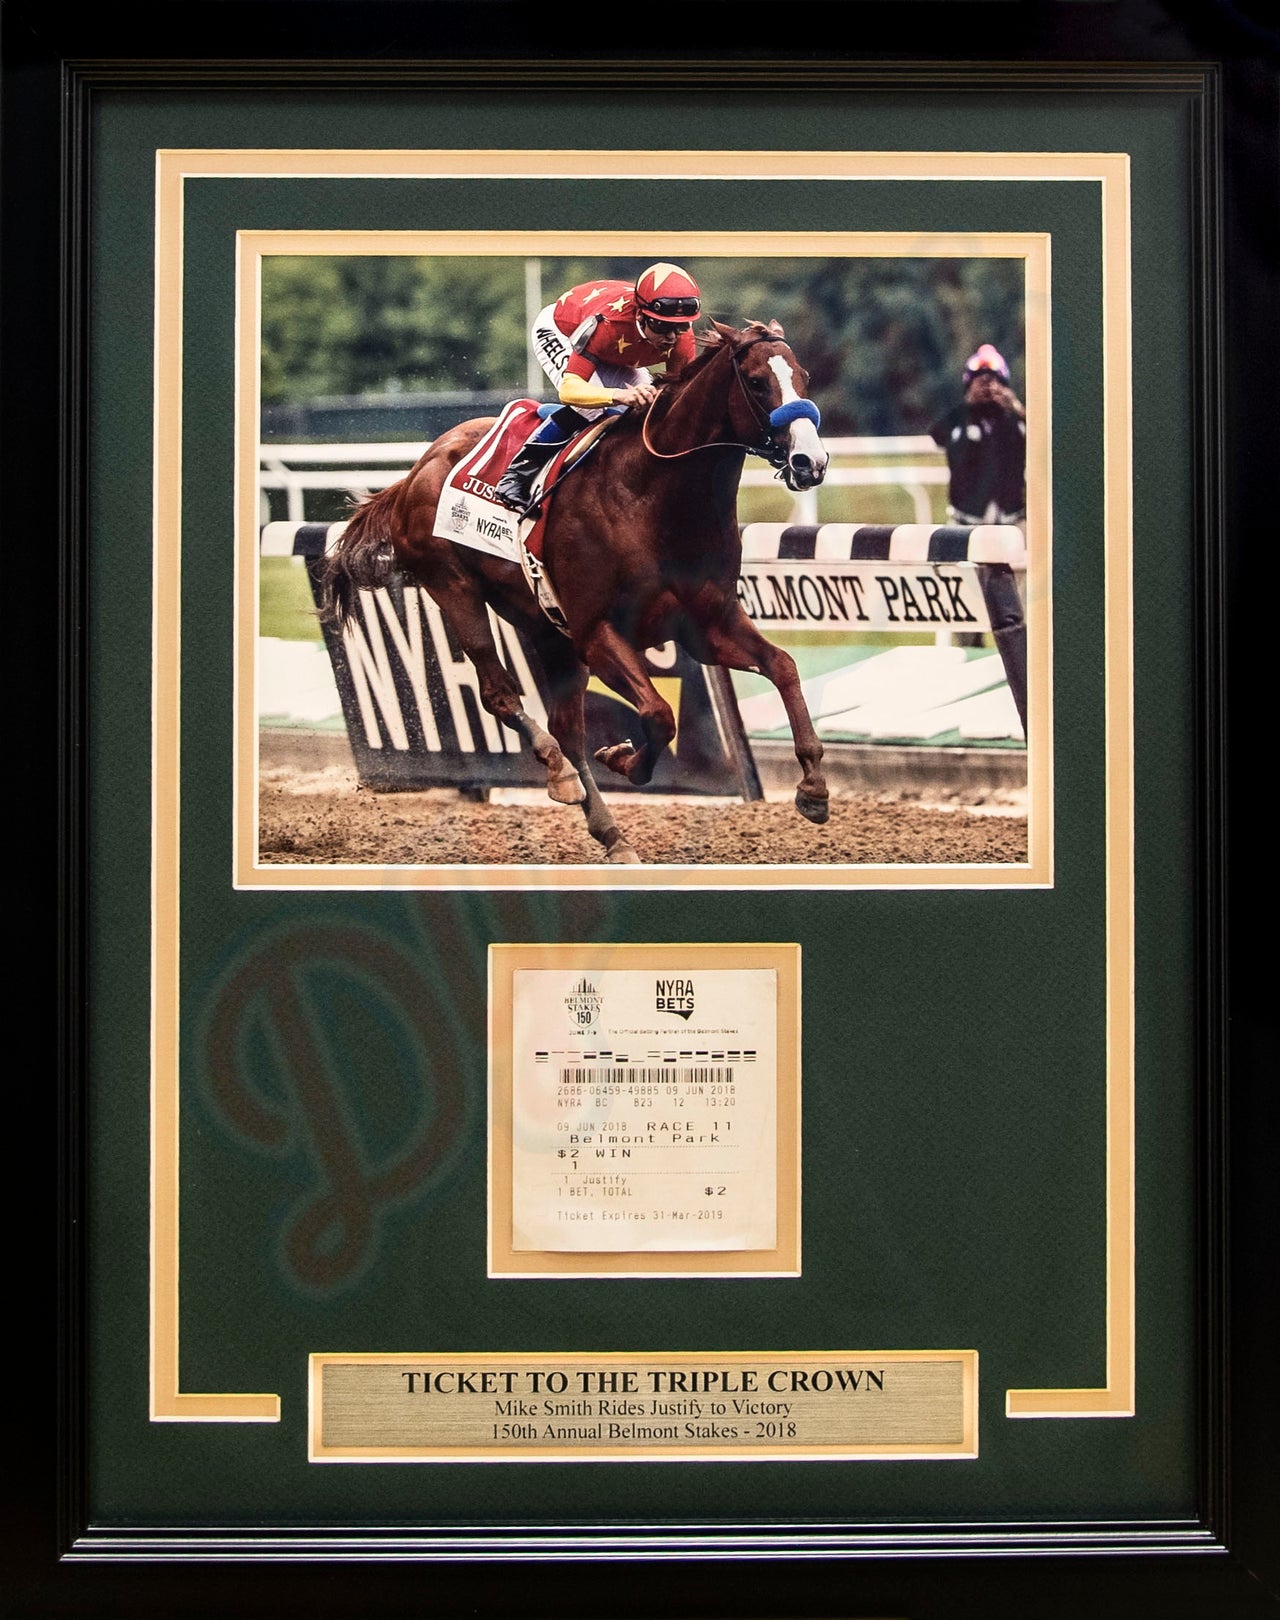 Mike Smith & Justify 2018 Belmont Stakes Framed and Matted Horse Racing Ticket Collage - Dynasty Sports & Framing 